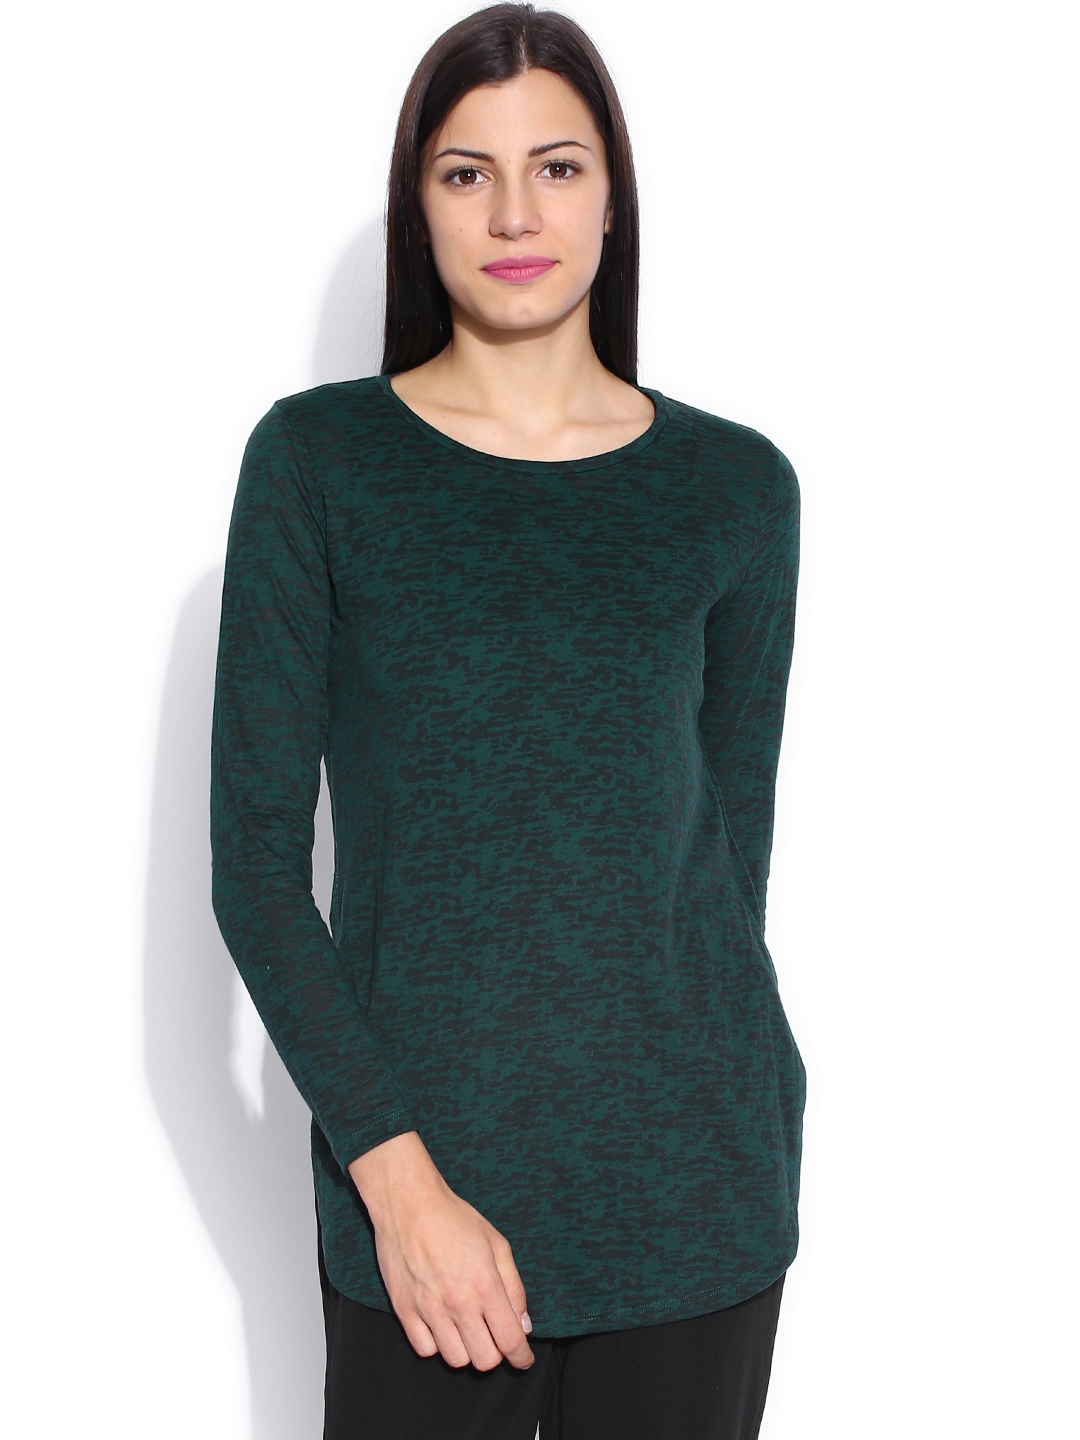 Buy ONLY Green & Black Top - Tops for Women 1017723 | Myntra